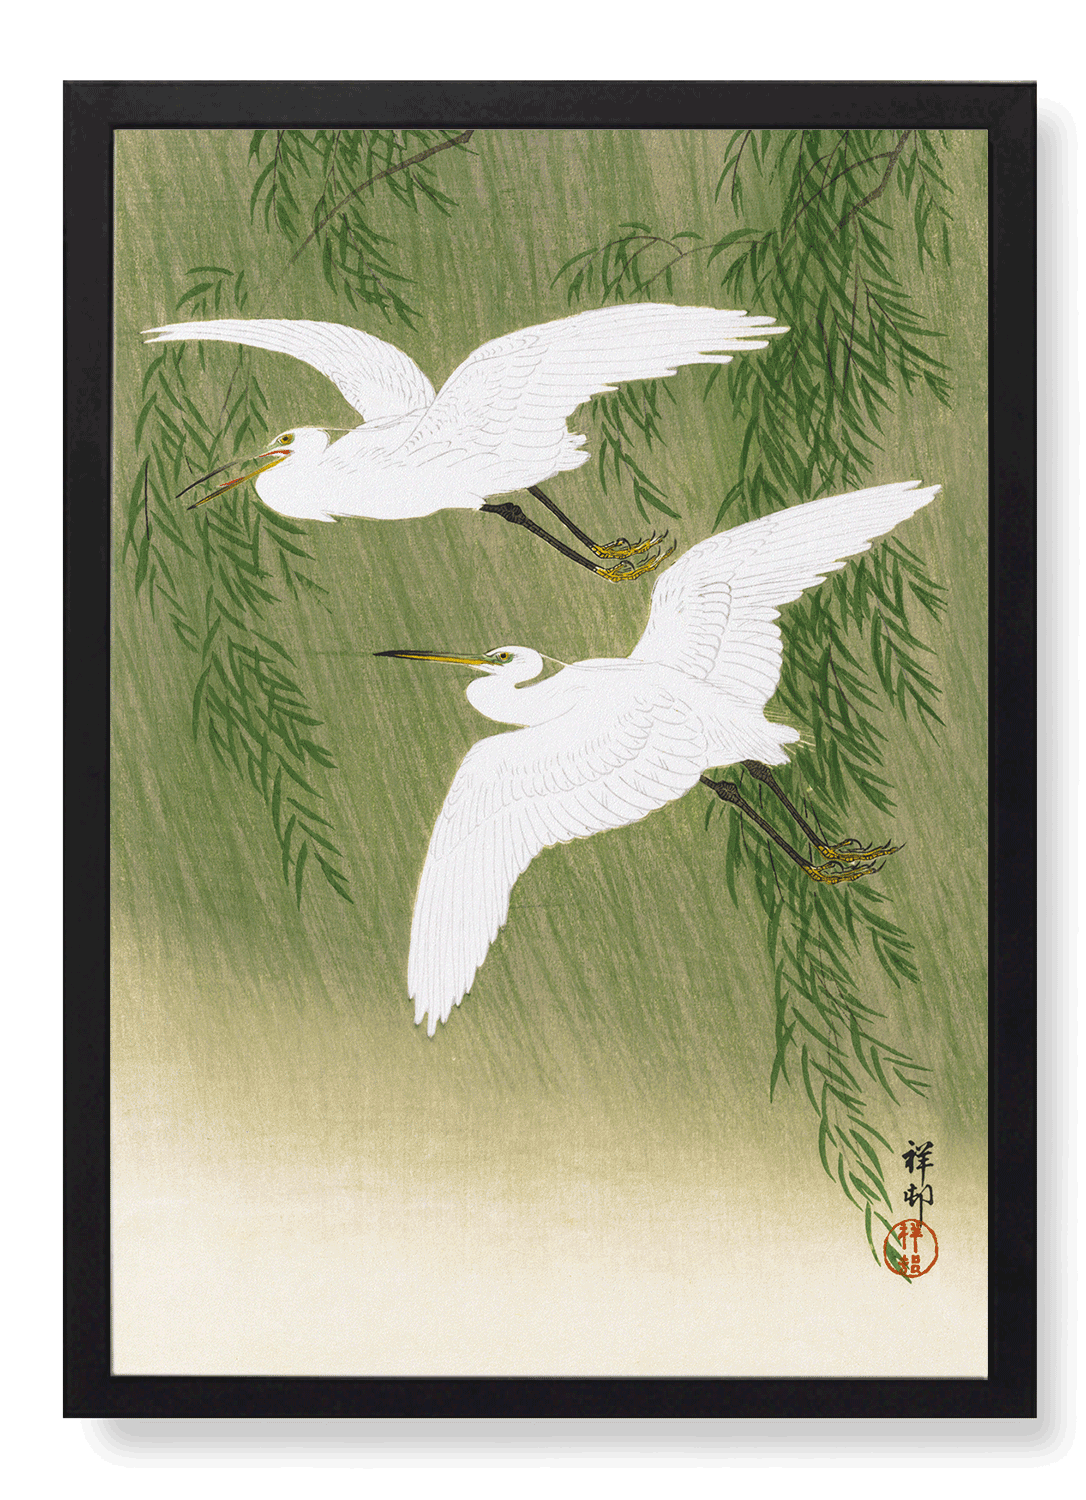 EGRETS AND WILLOW